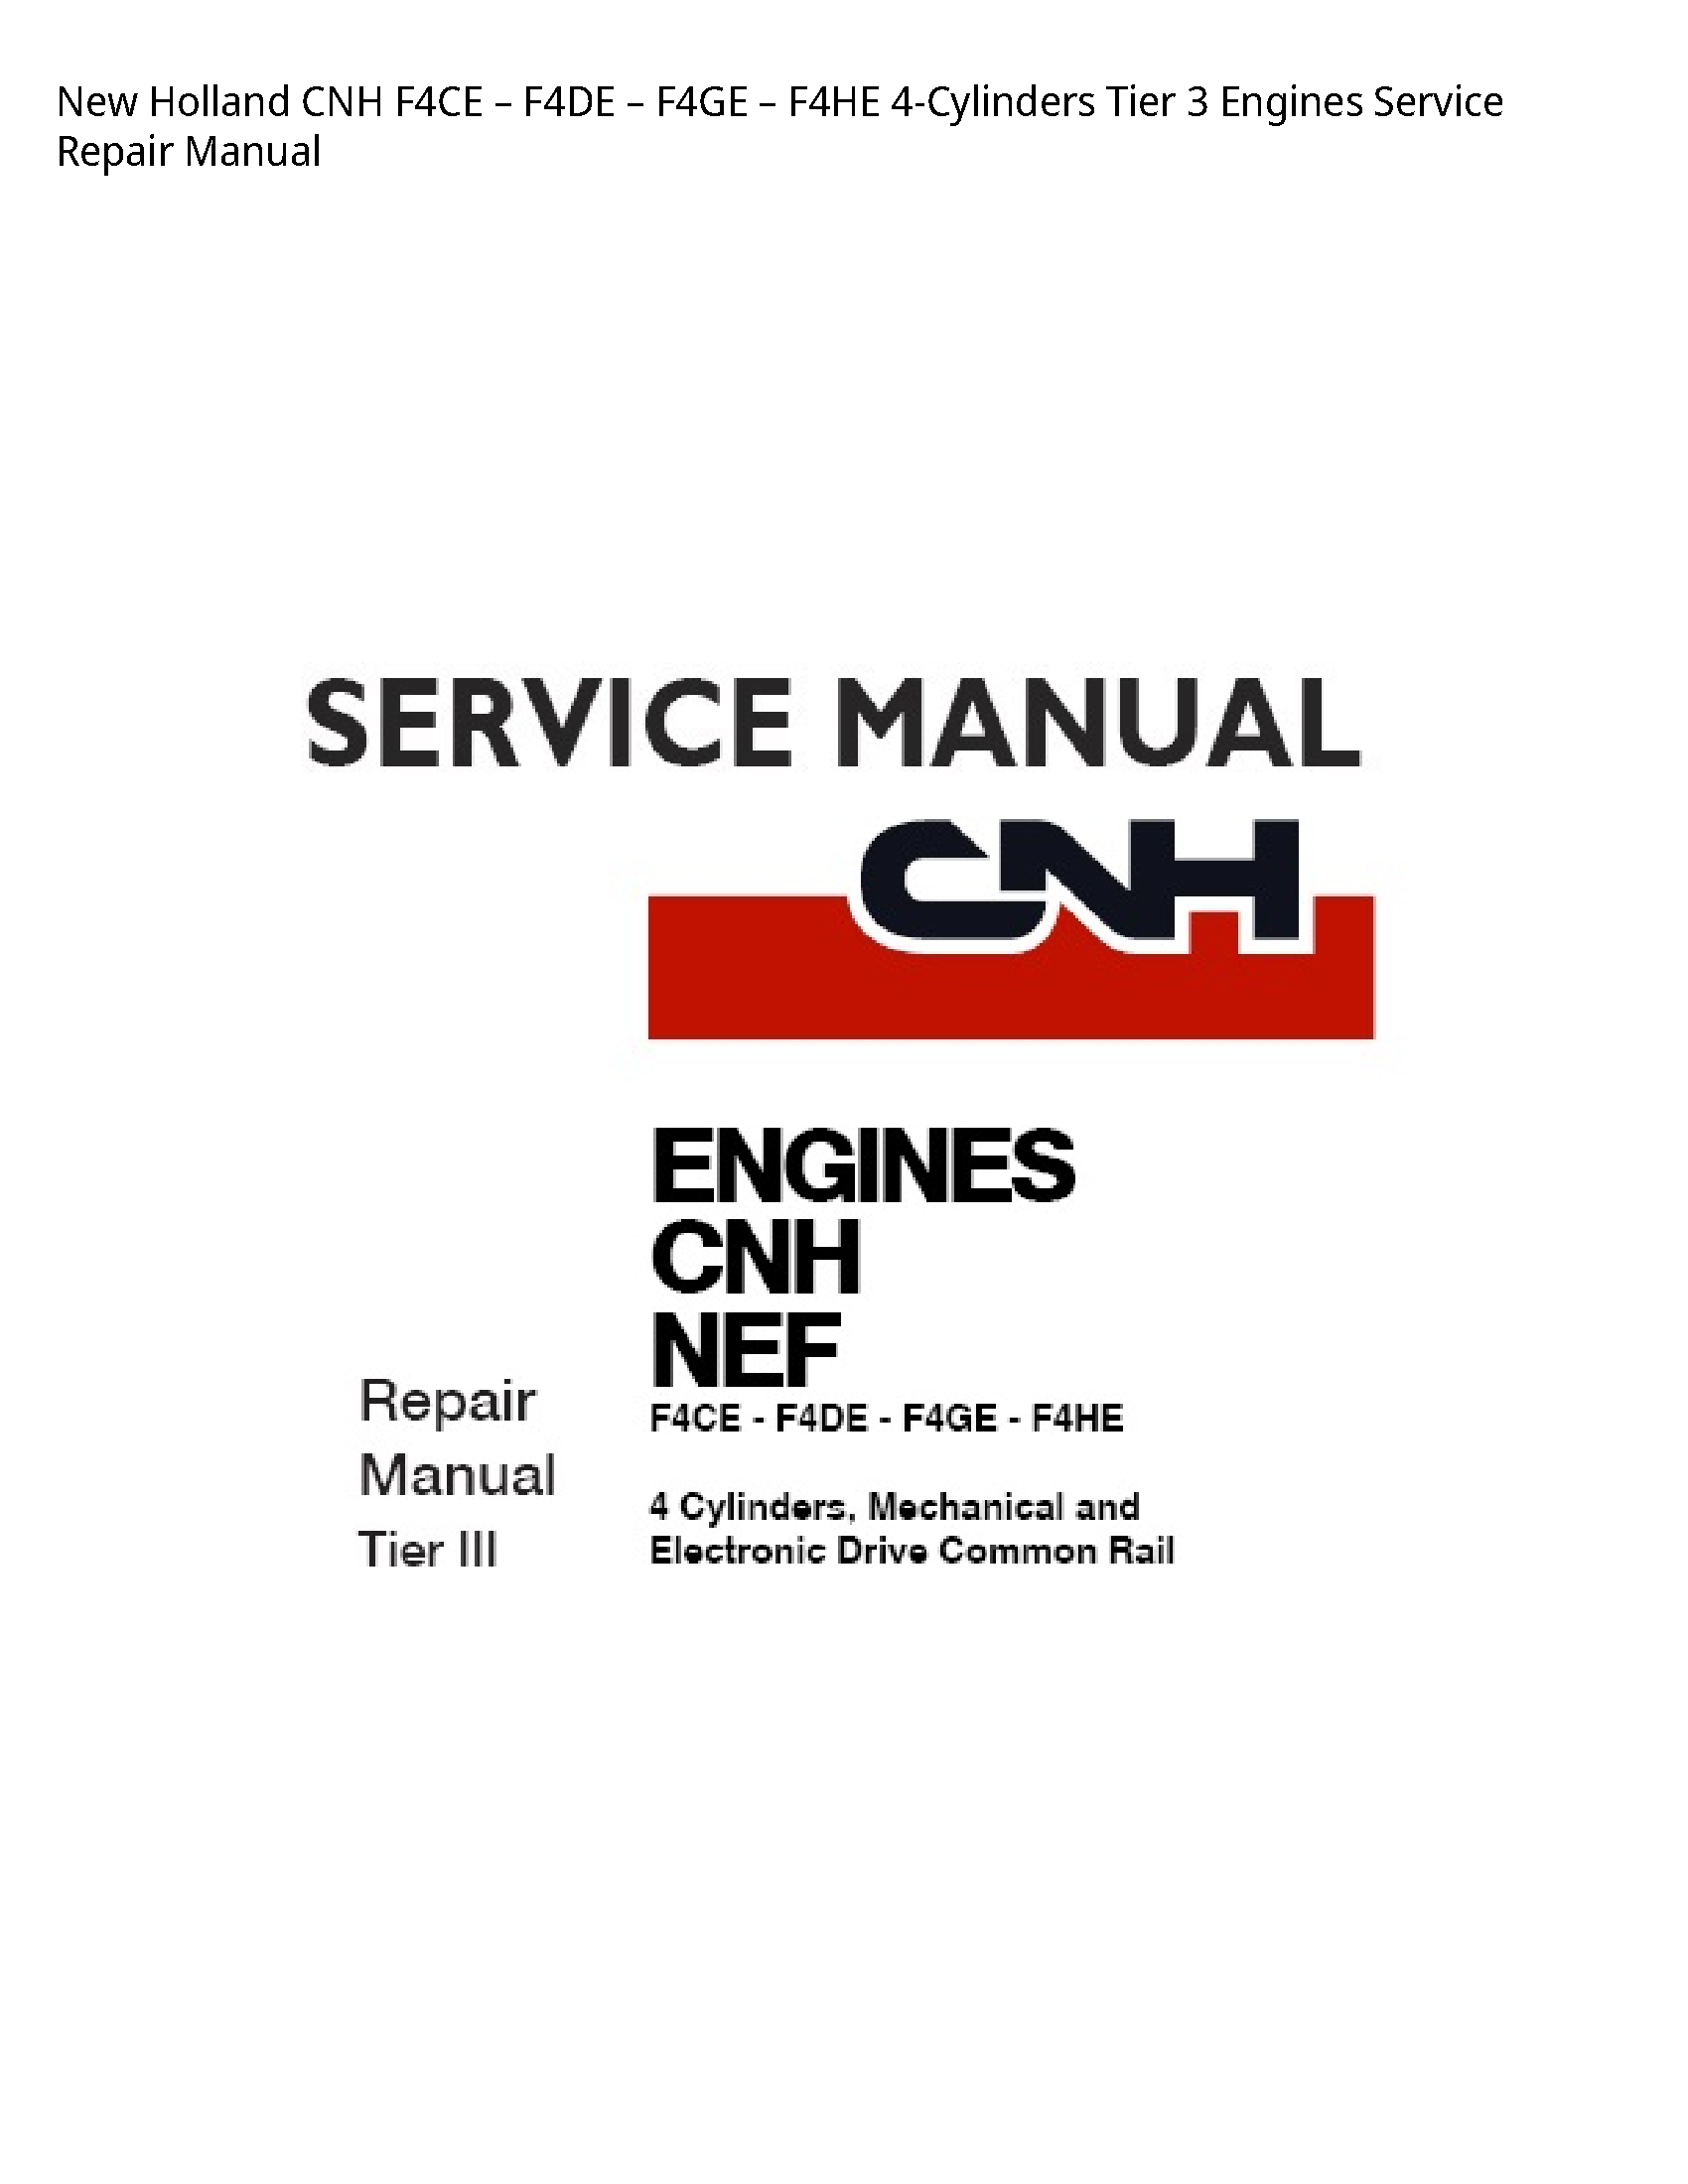 New Holland F4CE CNH Tier Engines manual